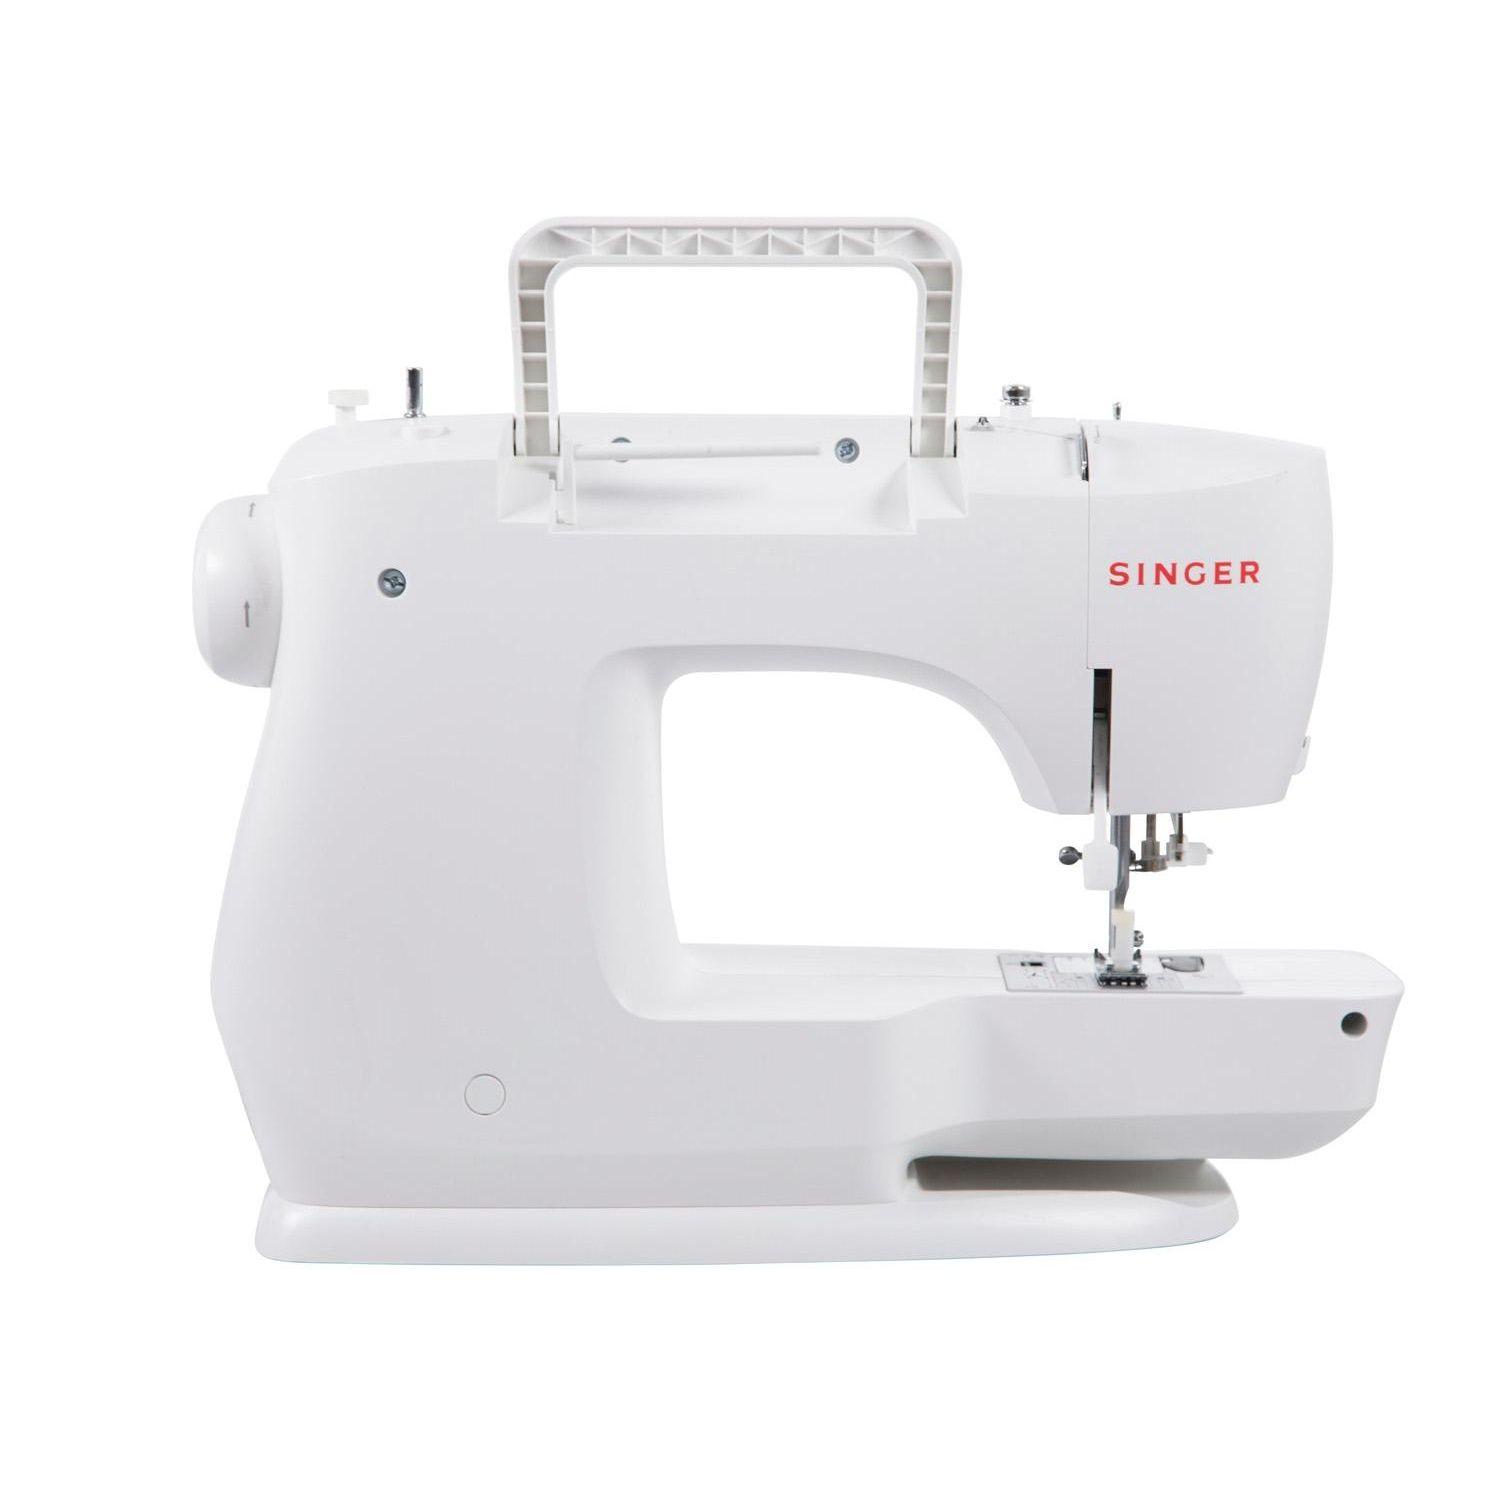 SINGER Simple 3337 Automatic sewing machine Electric